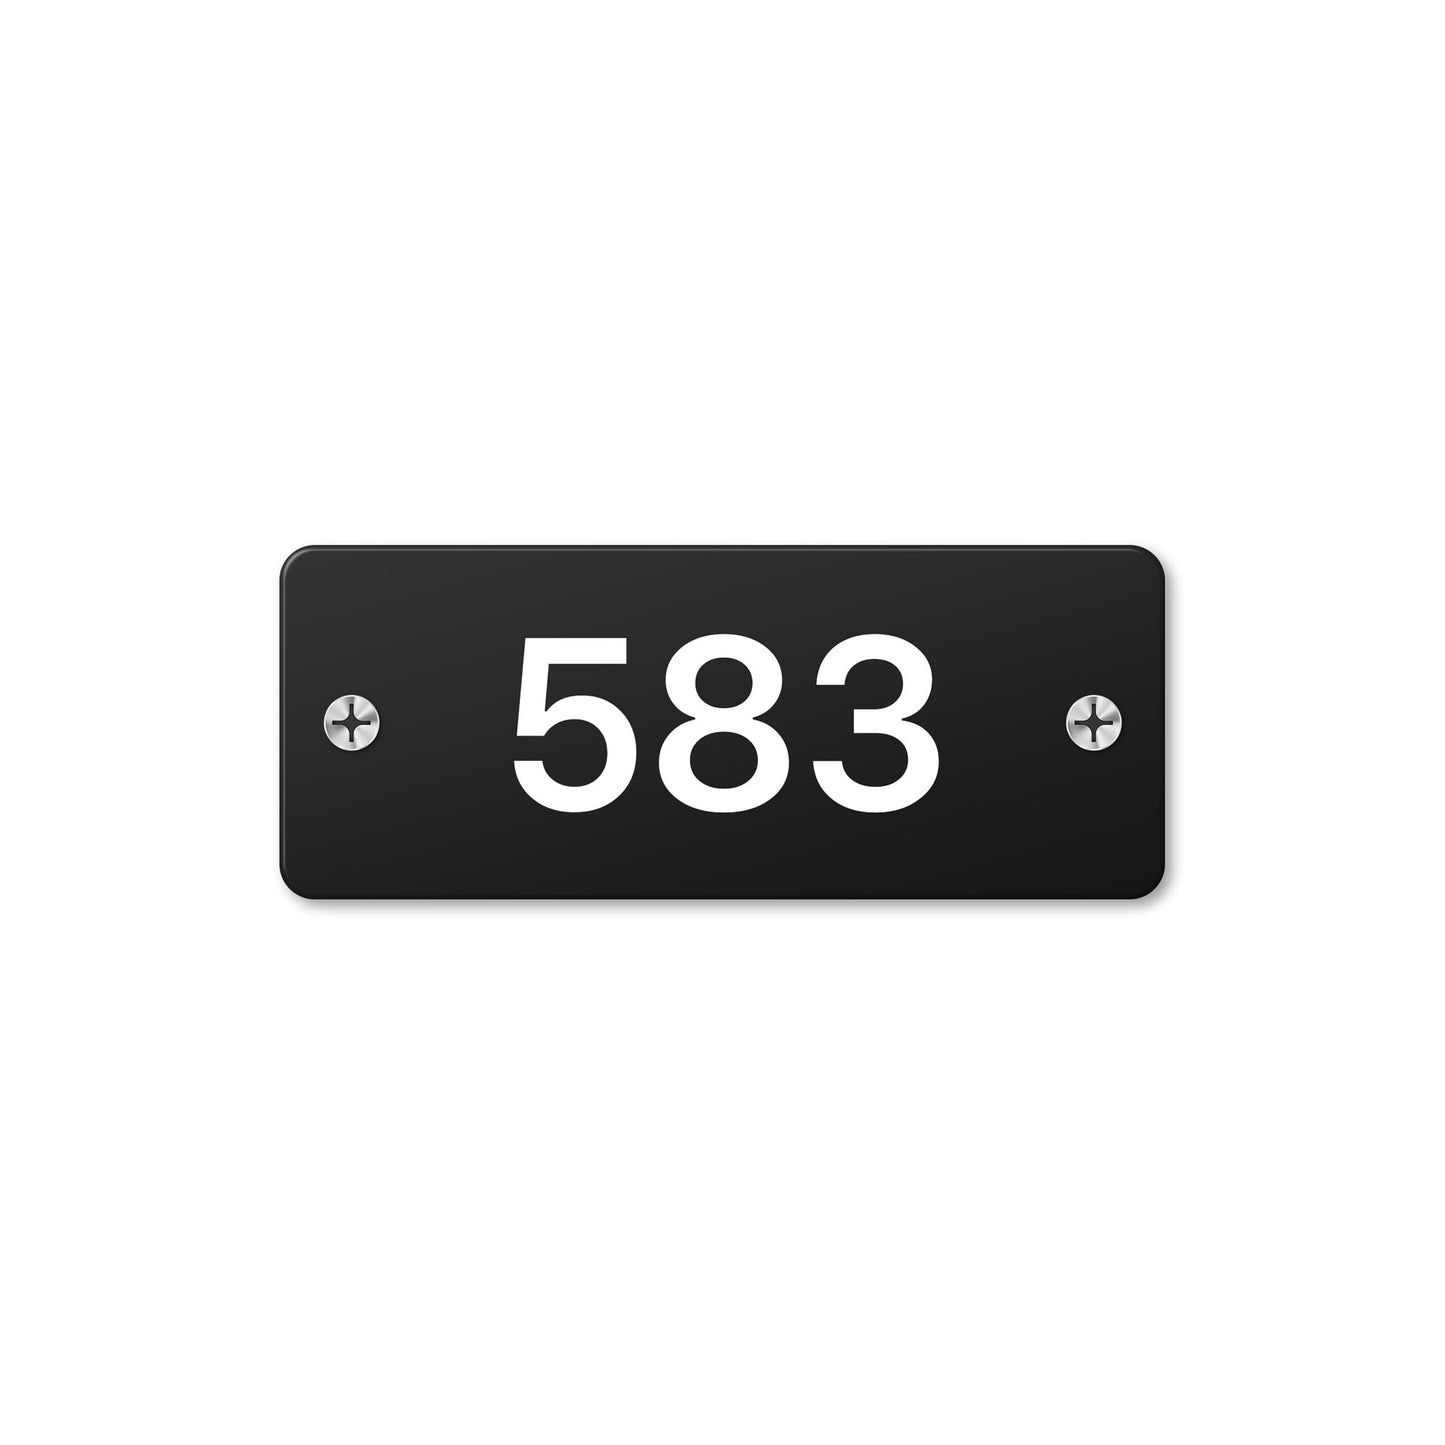 Numeral 583